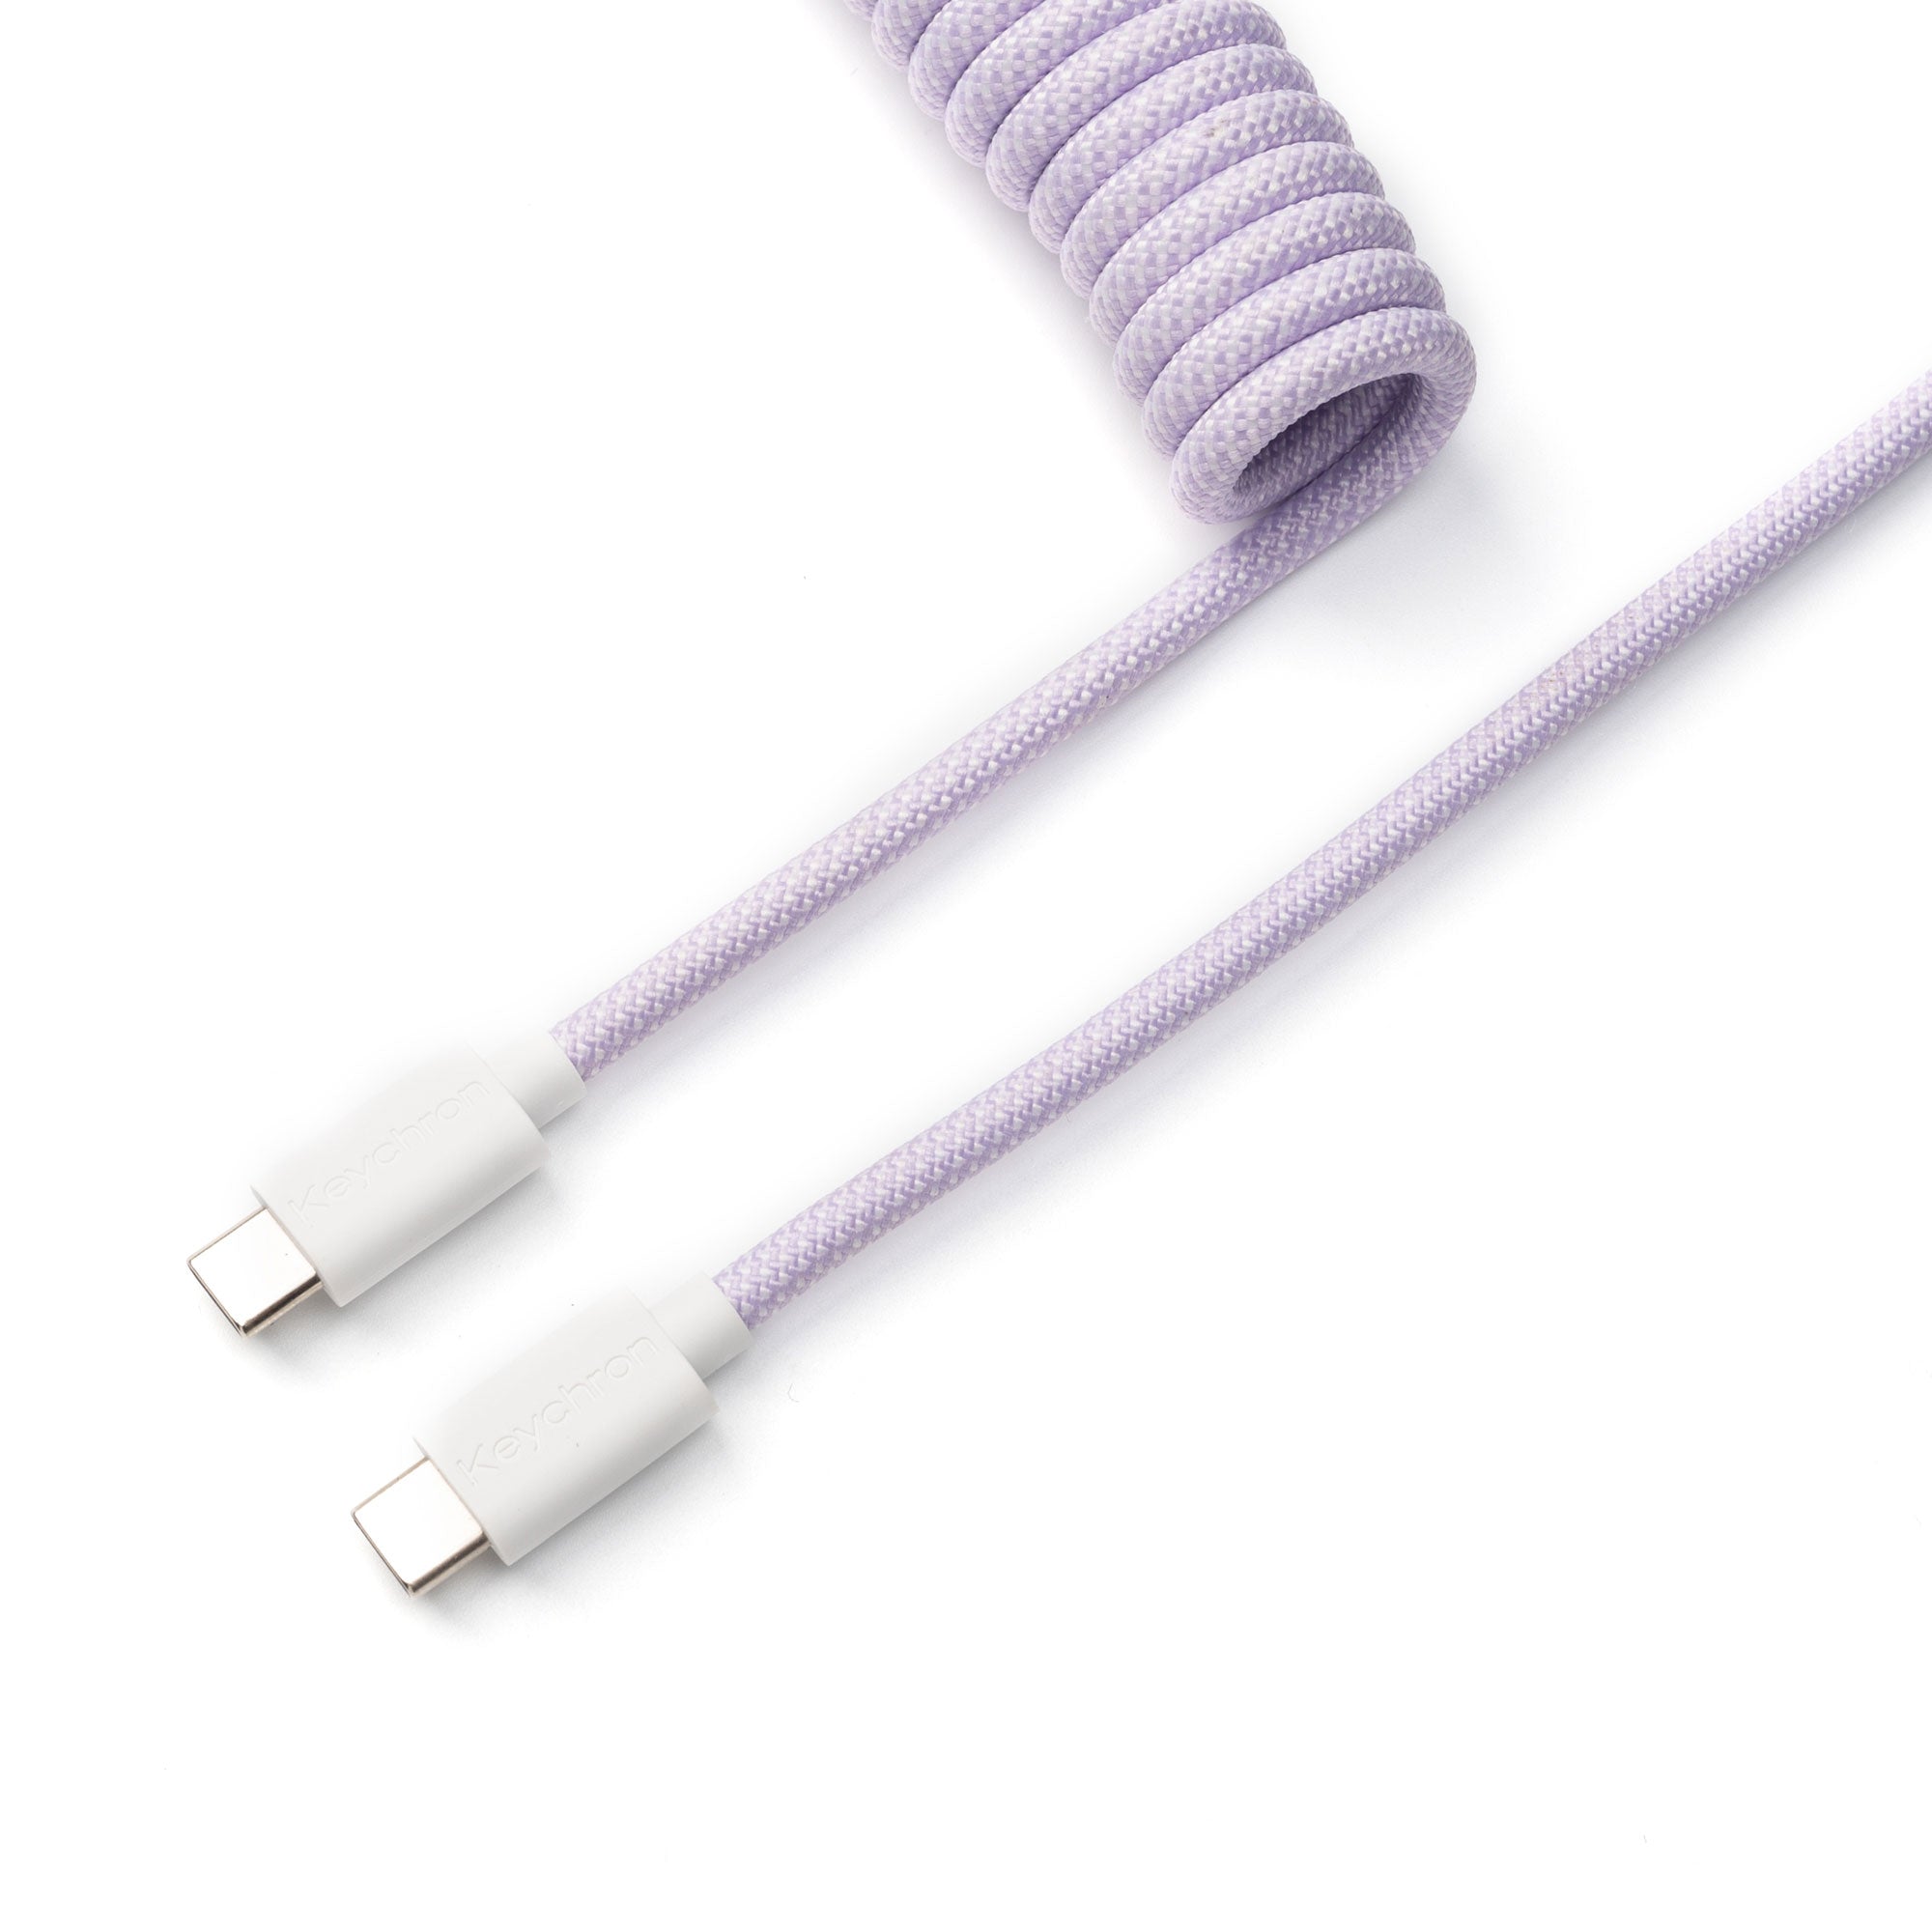 Keychron custom coiled aviator USB type-C cable for keyboards light purple color